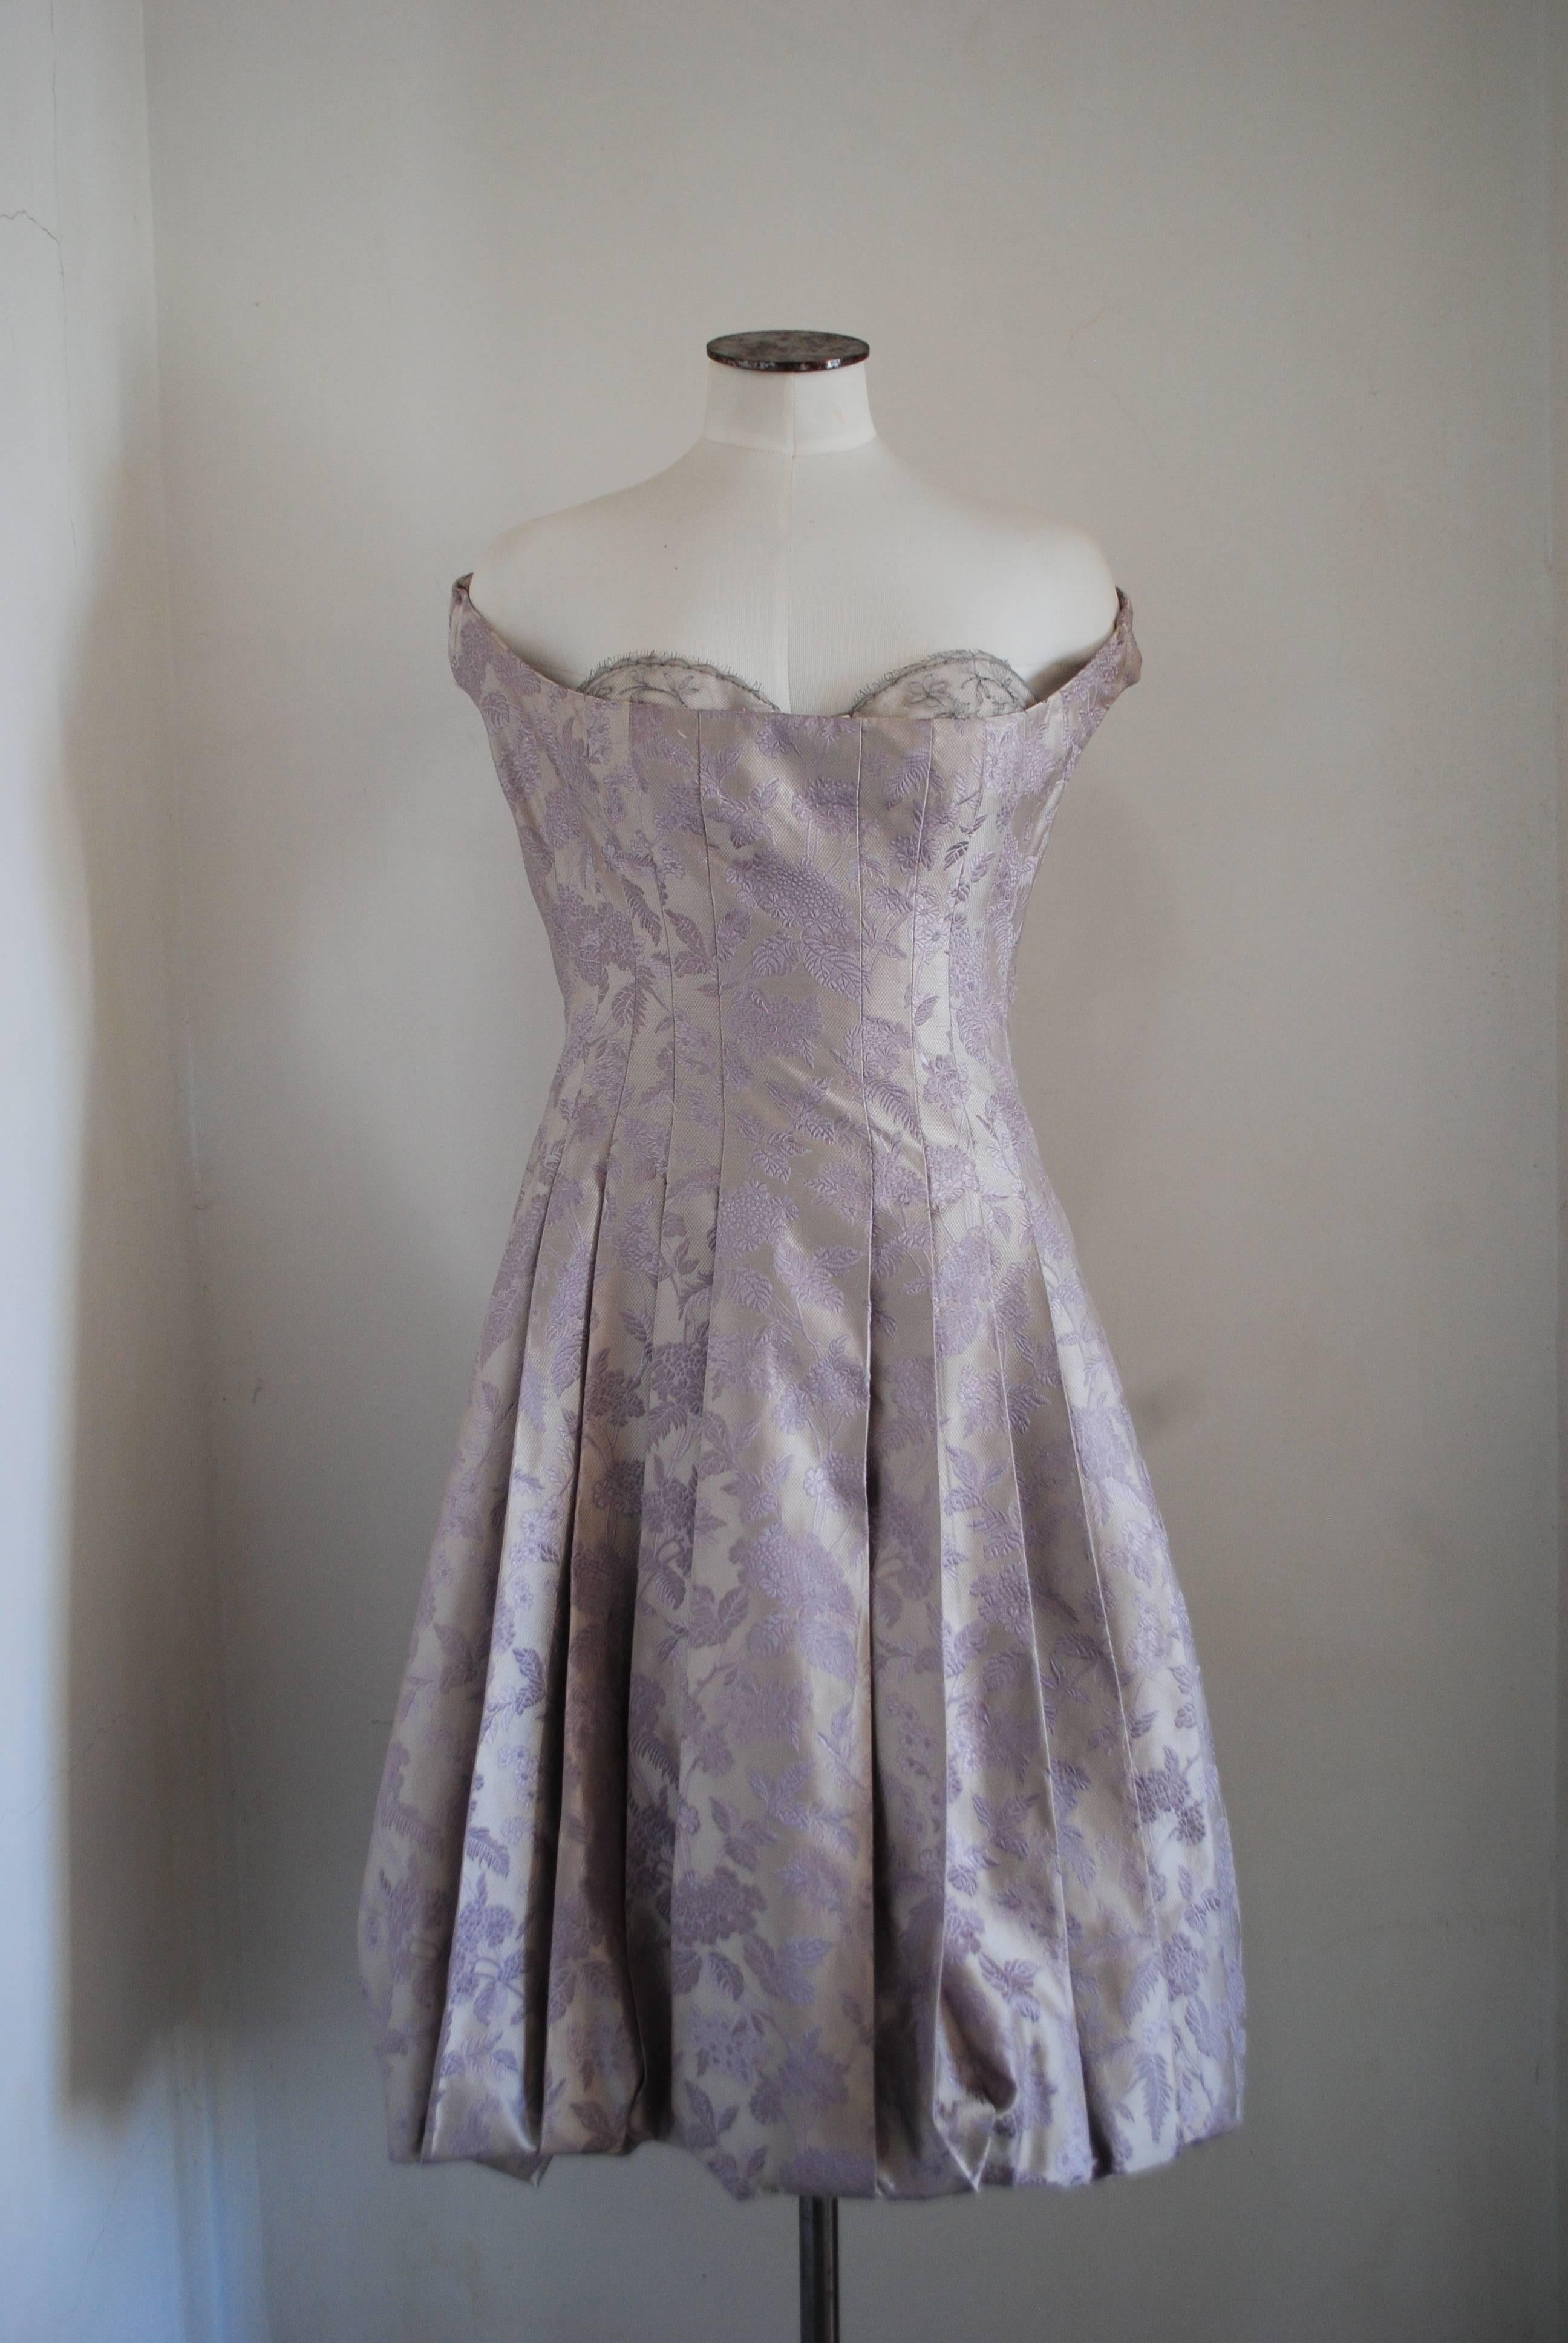 Alexander McQueen Silver light purple Dress NWOT
Unique and rare dress by McQueen
totally made in italy in italian size range 42
Composition Silk
